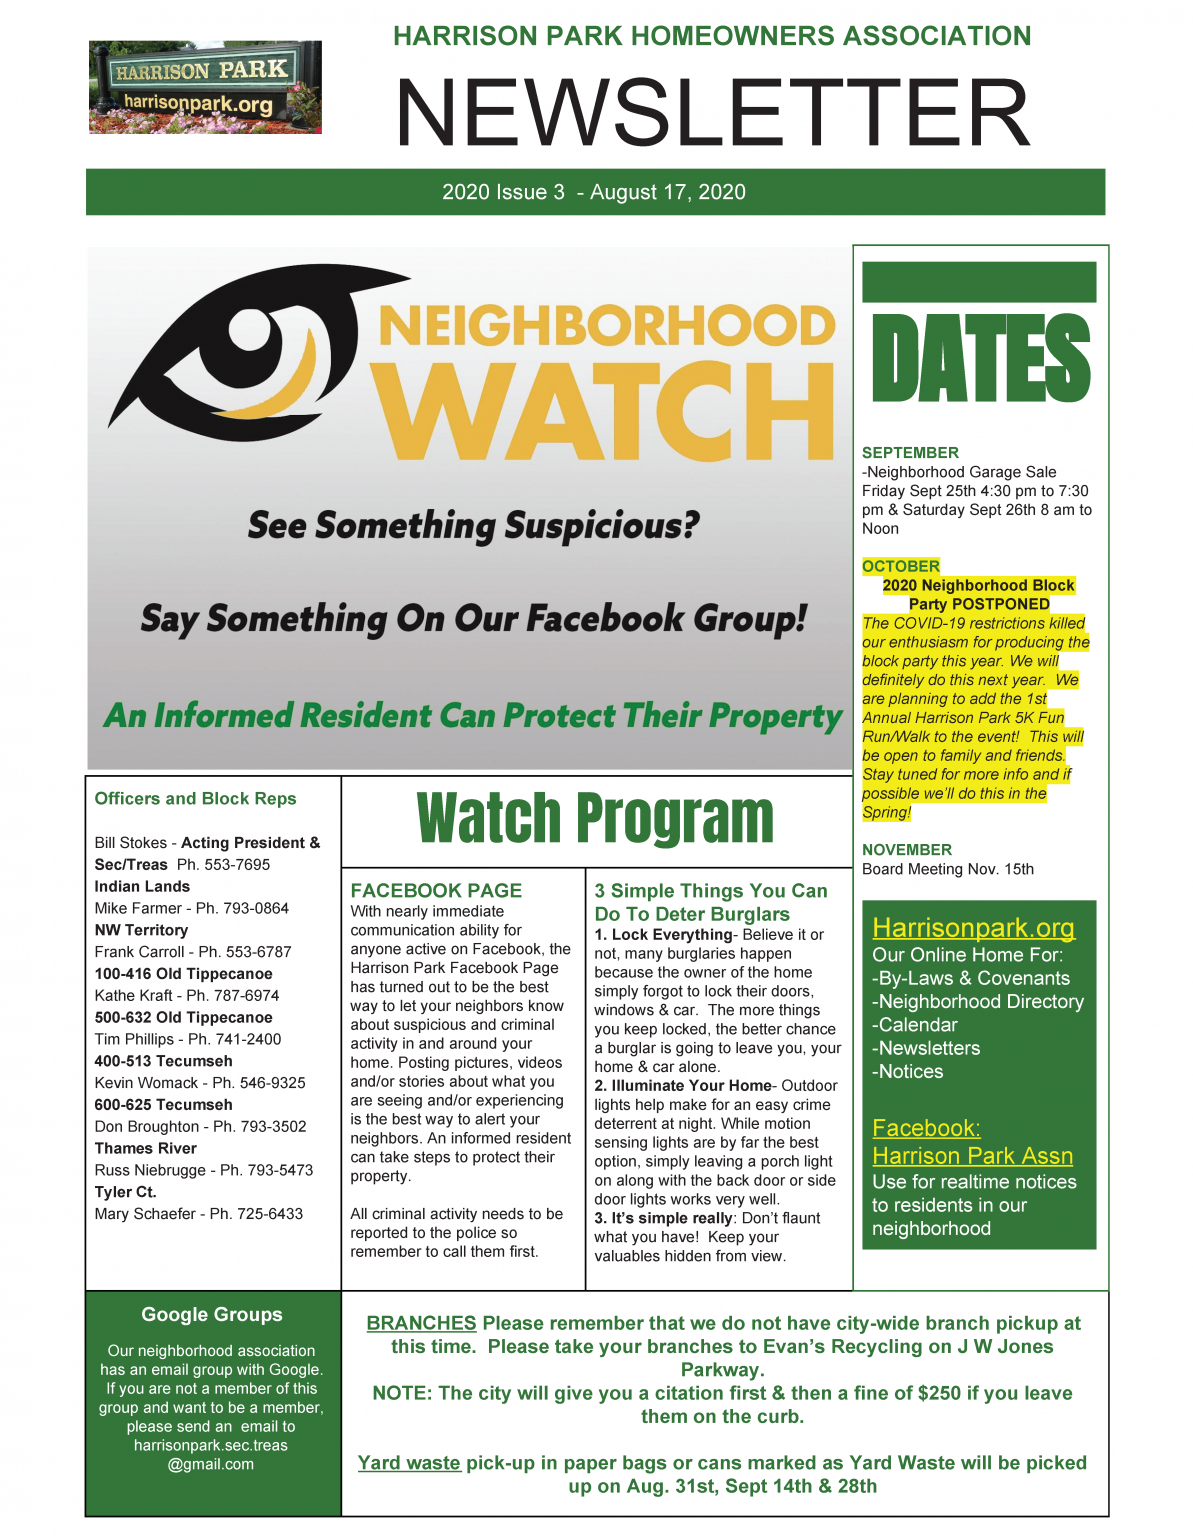 examples of hoa newsletters